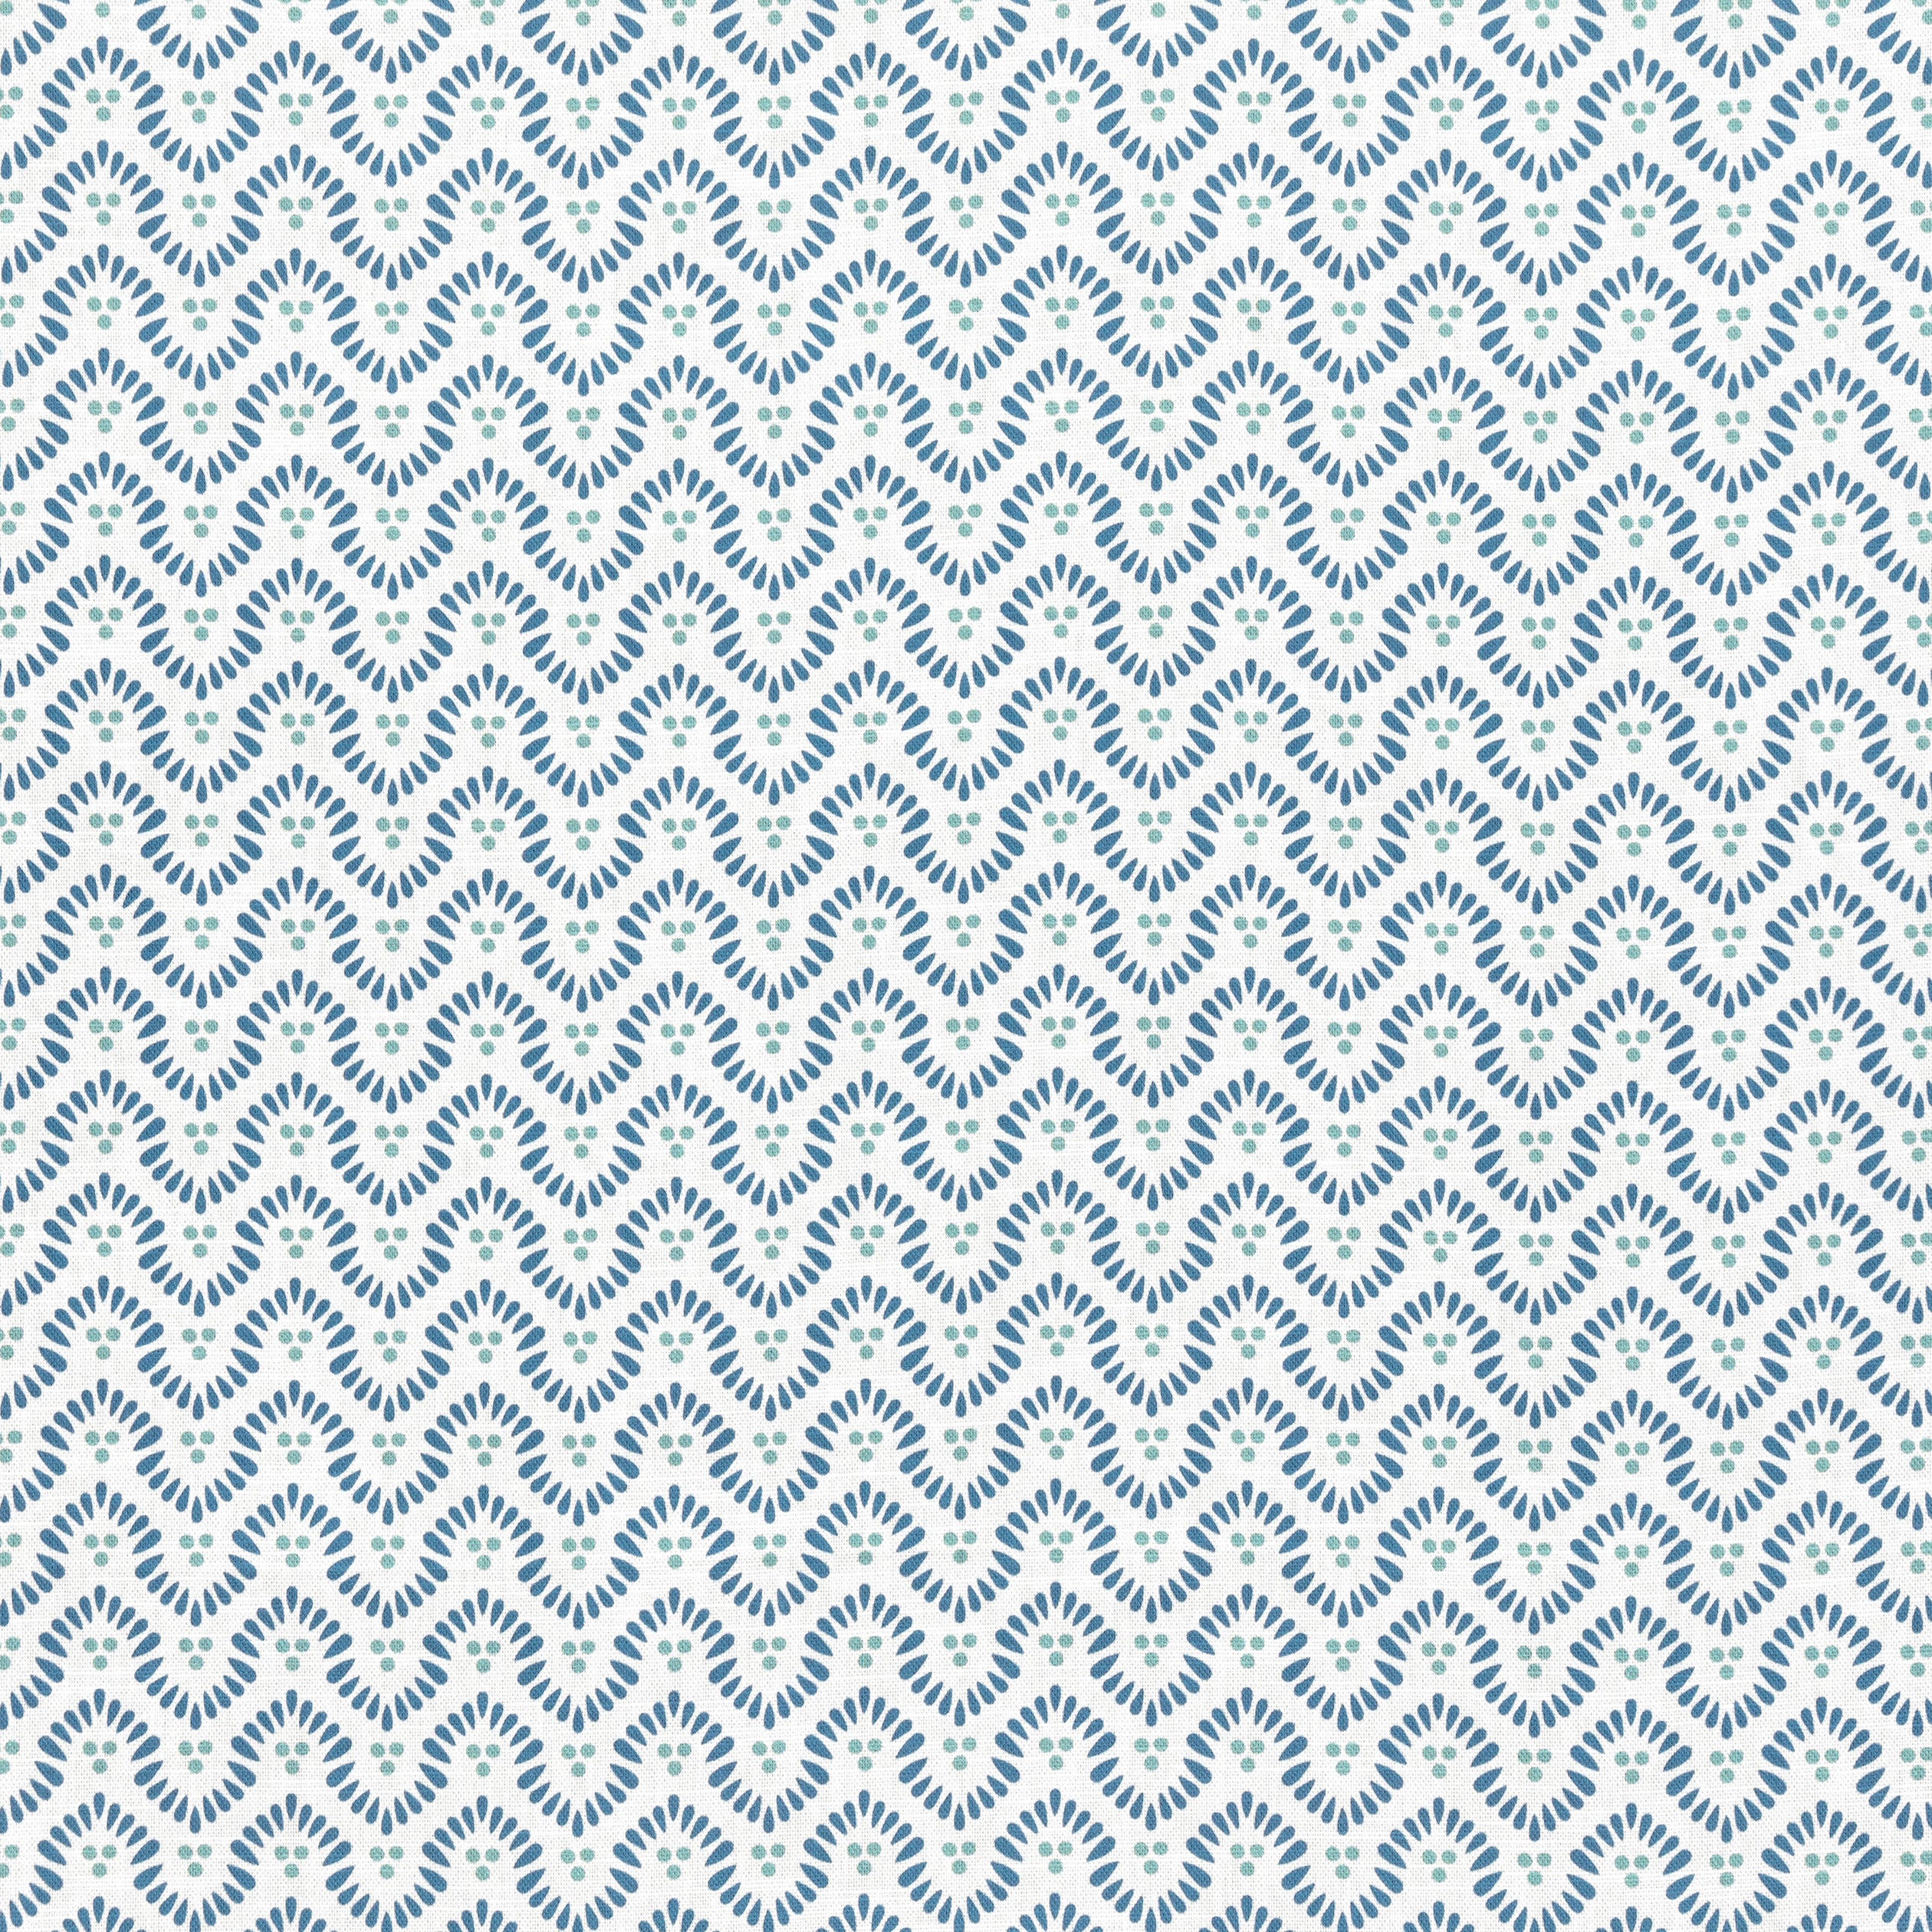 Wynford fabric in navy on white color - pattern number AF23146 - by Anna French in the Willow Tree collection